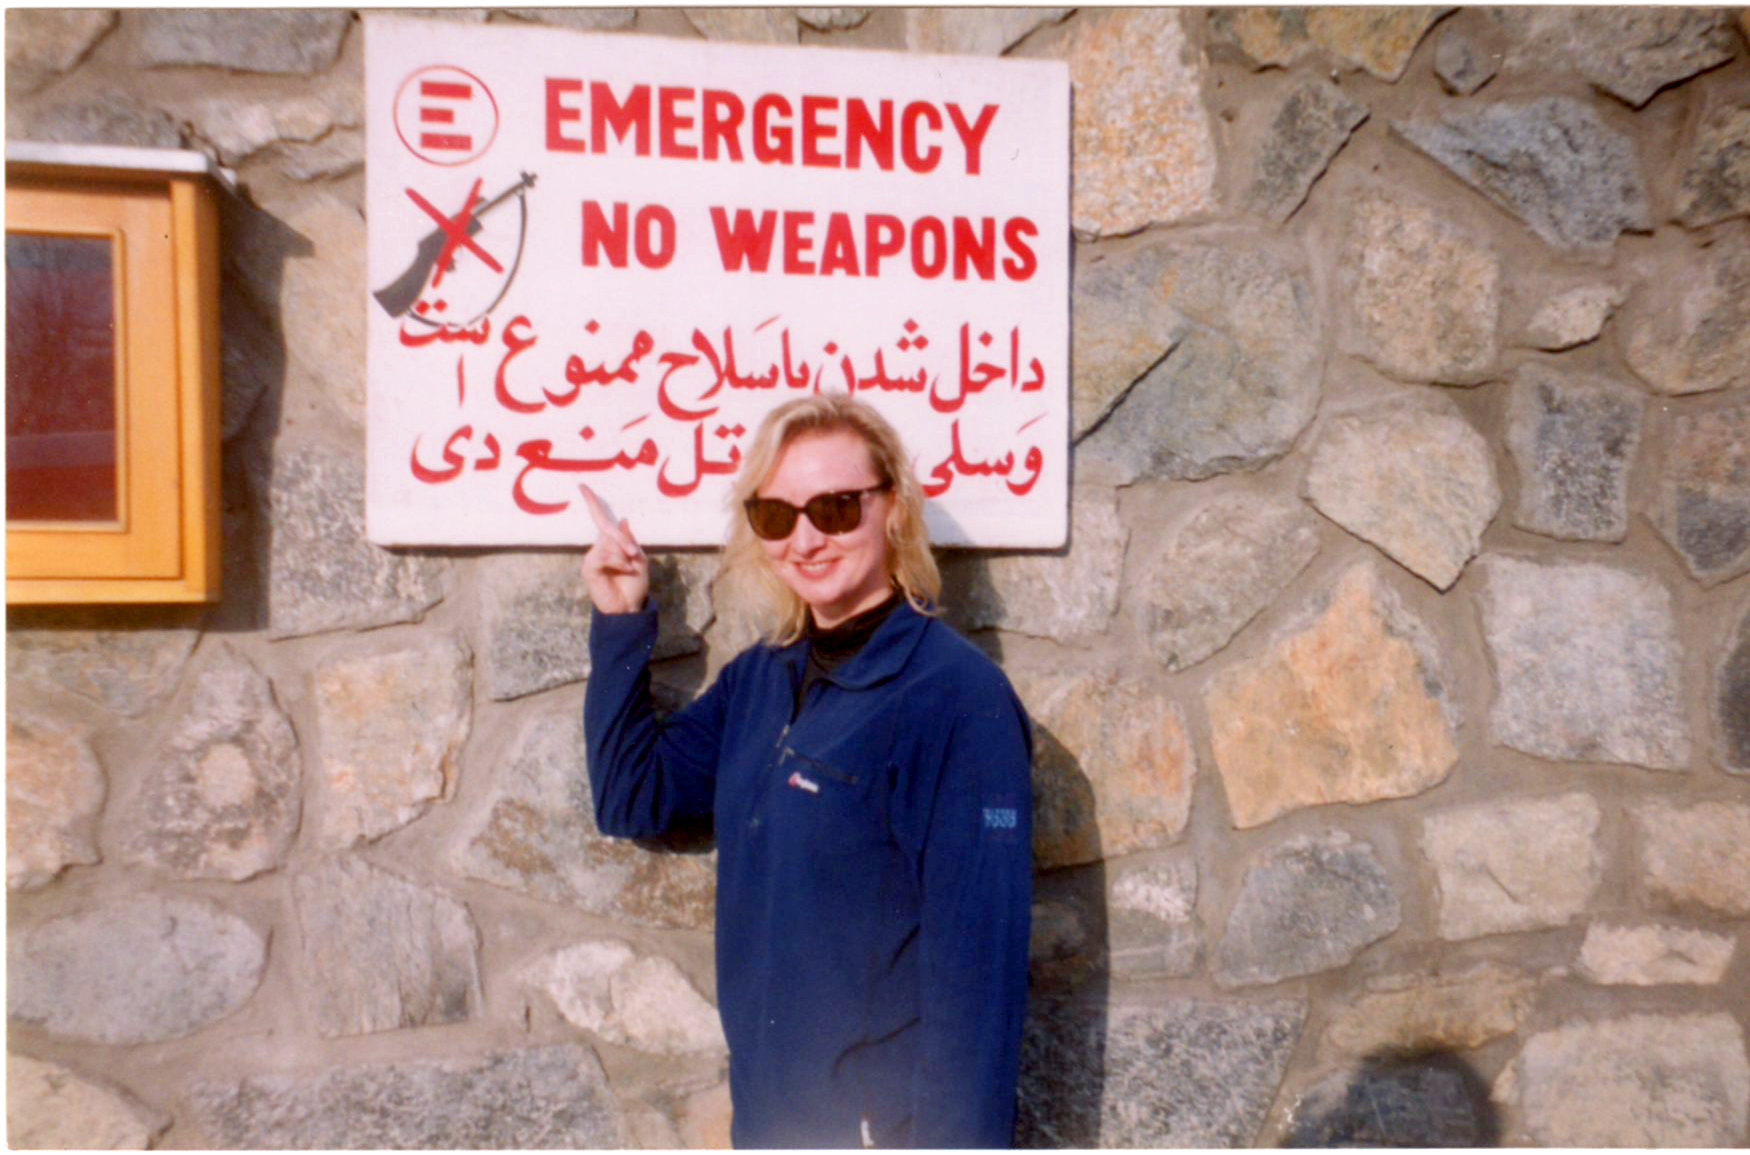 War Reporter Alex Quade for CNN, outside the ER hospital in Kabul, Afghanistan, 2002. No weapons, no AK-47's allowed inside.